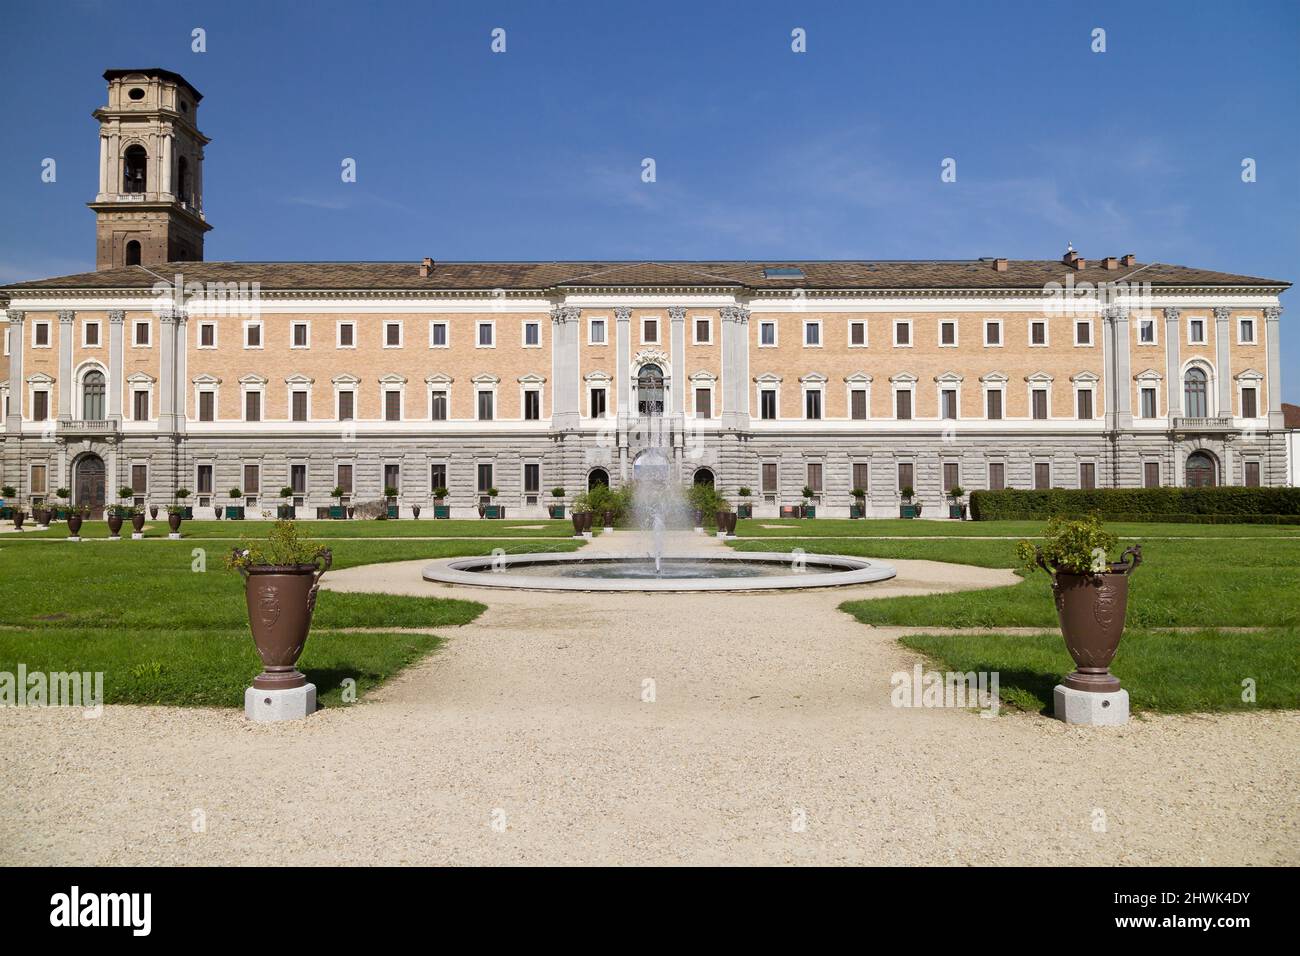 Royal Palace and Ducal Garden, Turin, Italy. Stock Photo